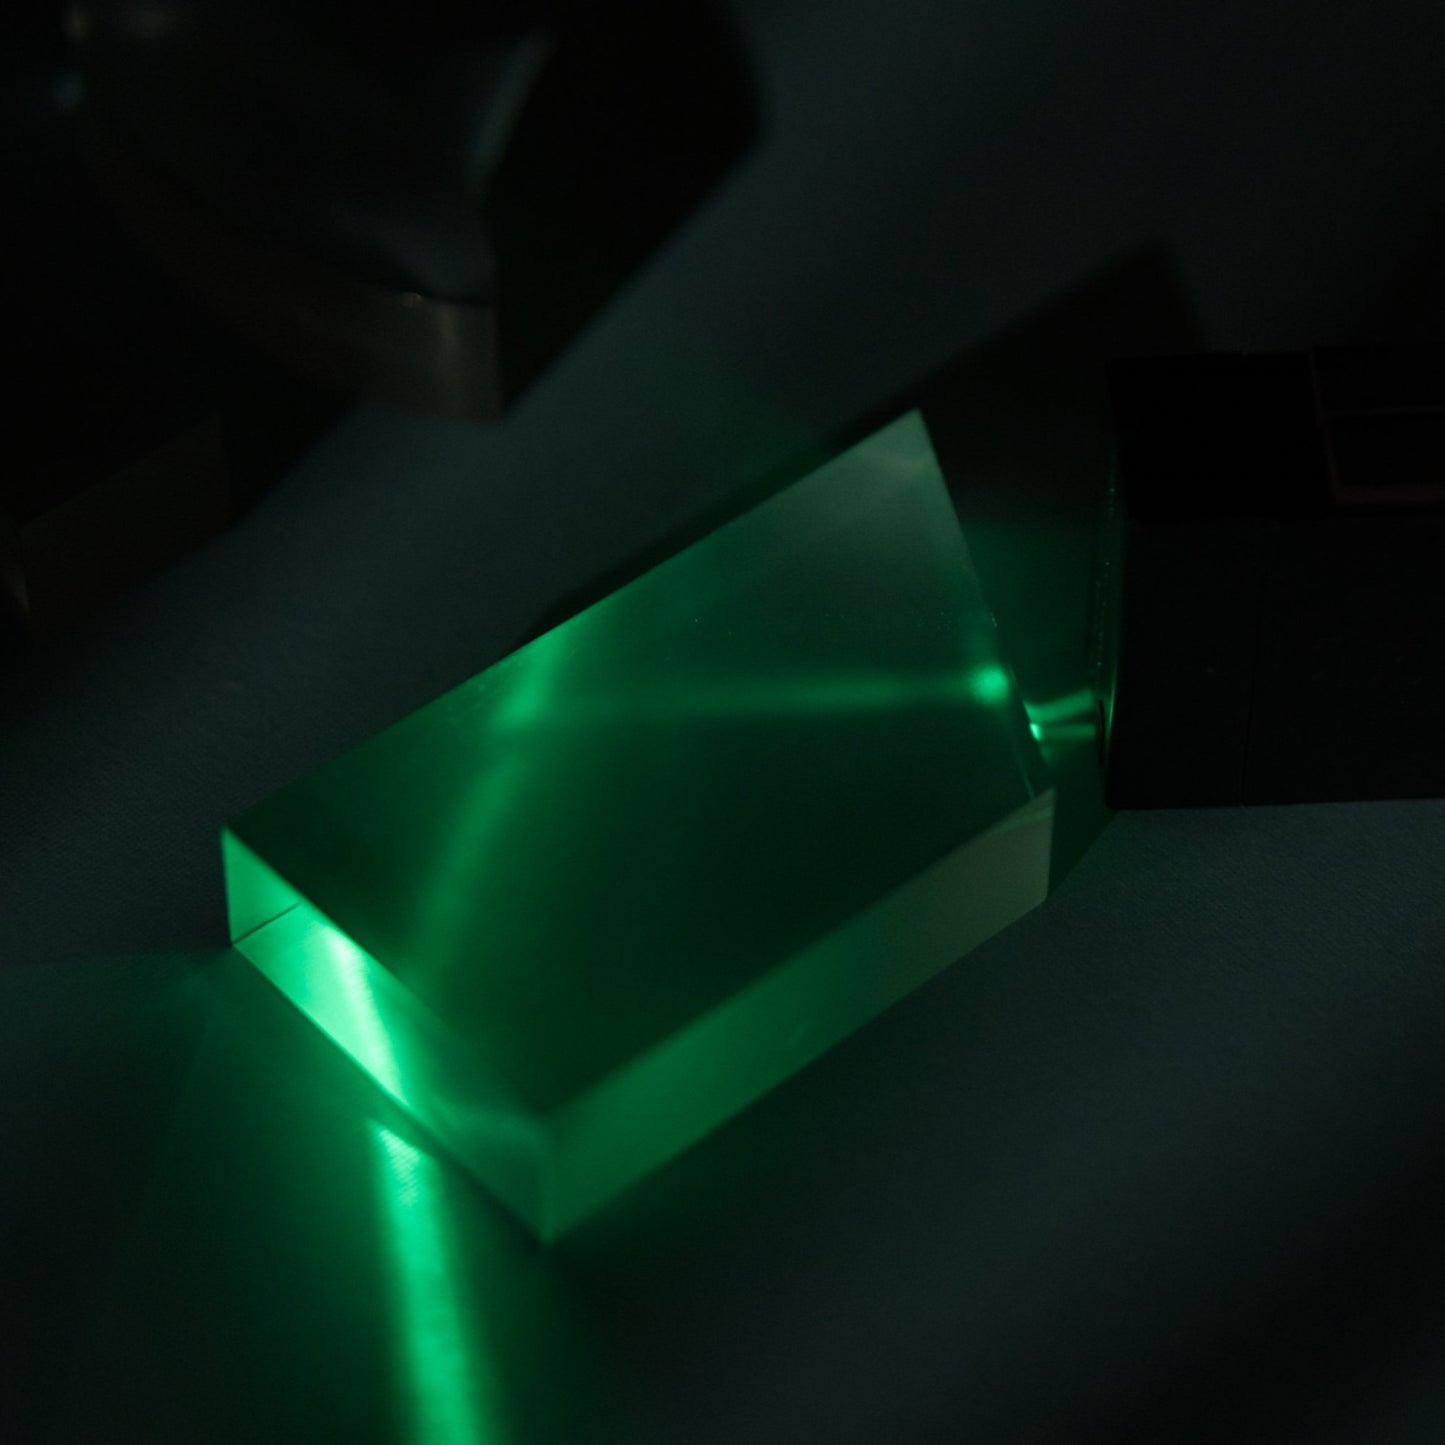 trapezoid prism with green ray box internal refraction experiment. Light is bouncing throught the 4 sided acrylic prism